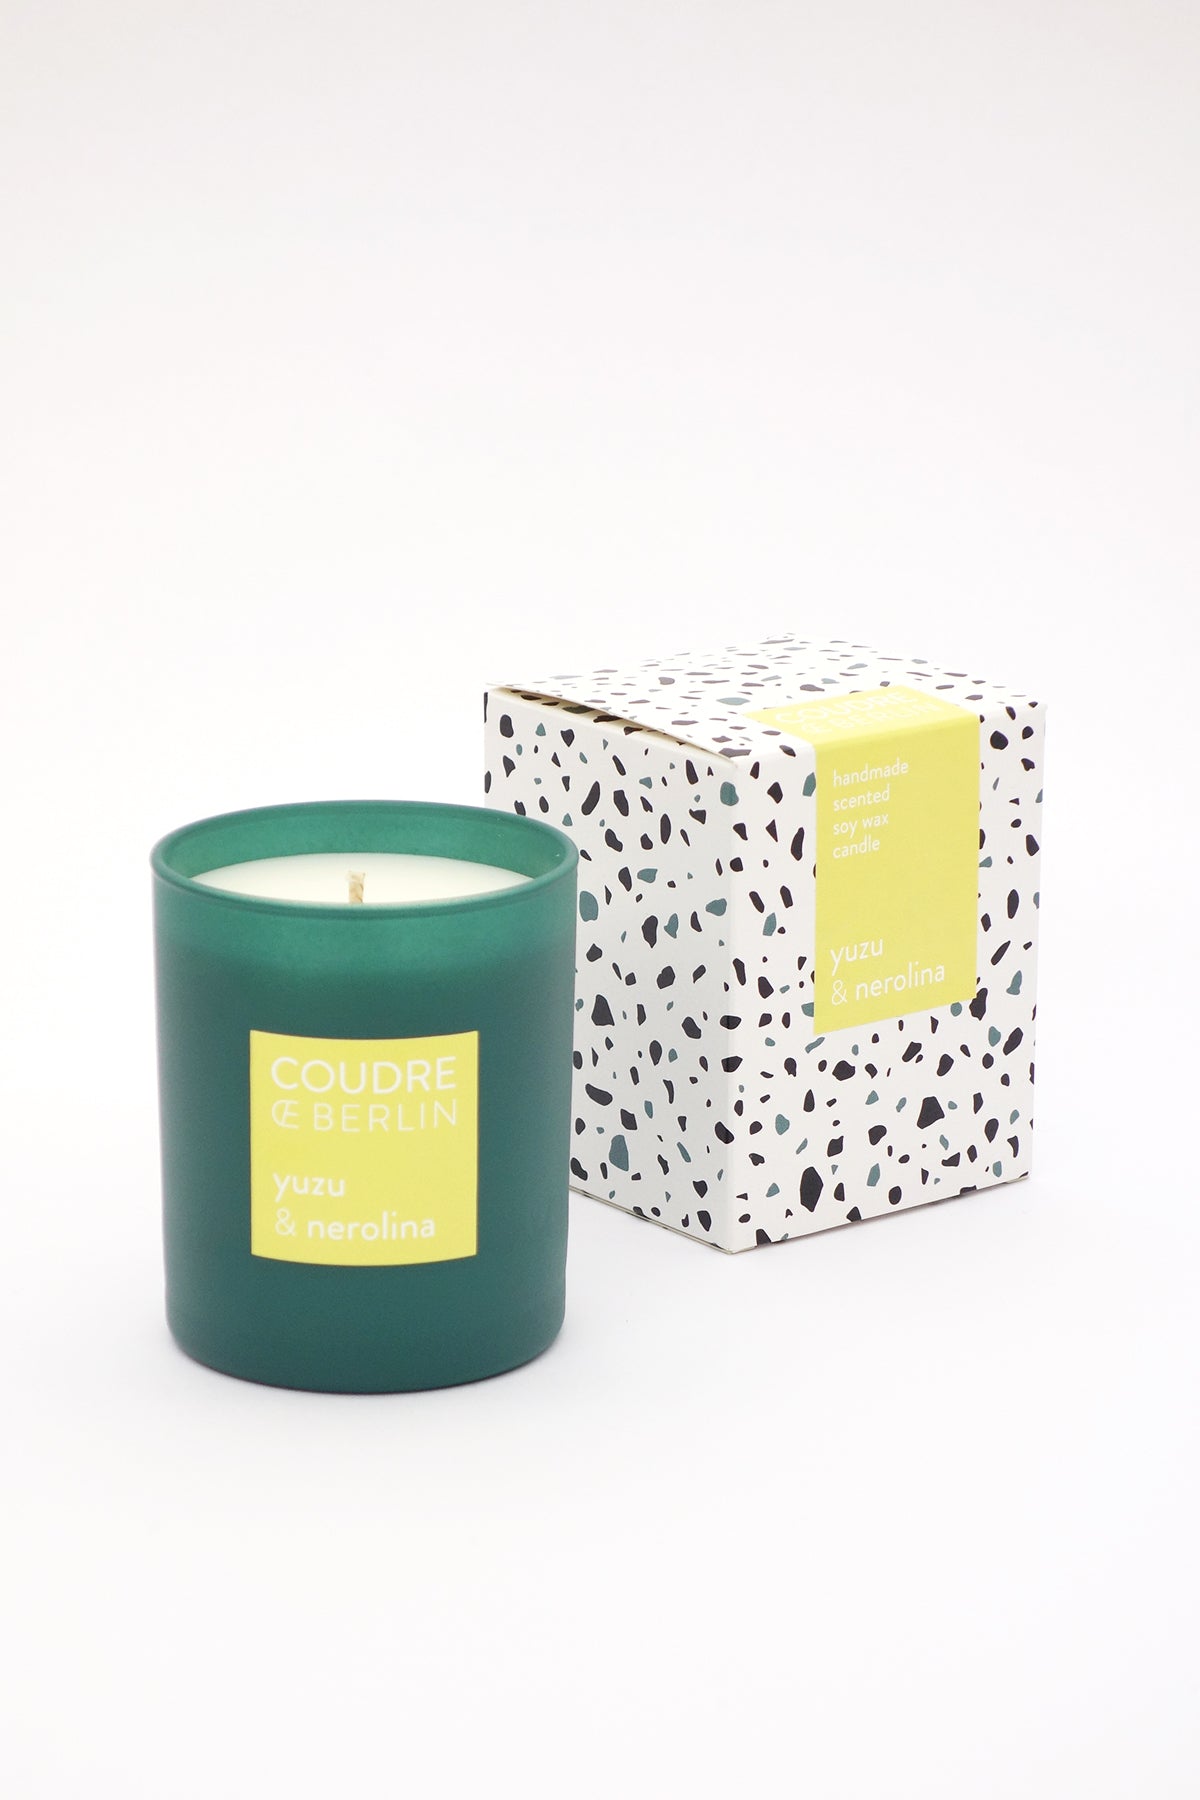 Coudre Candle